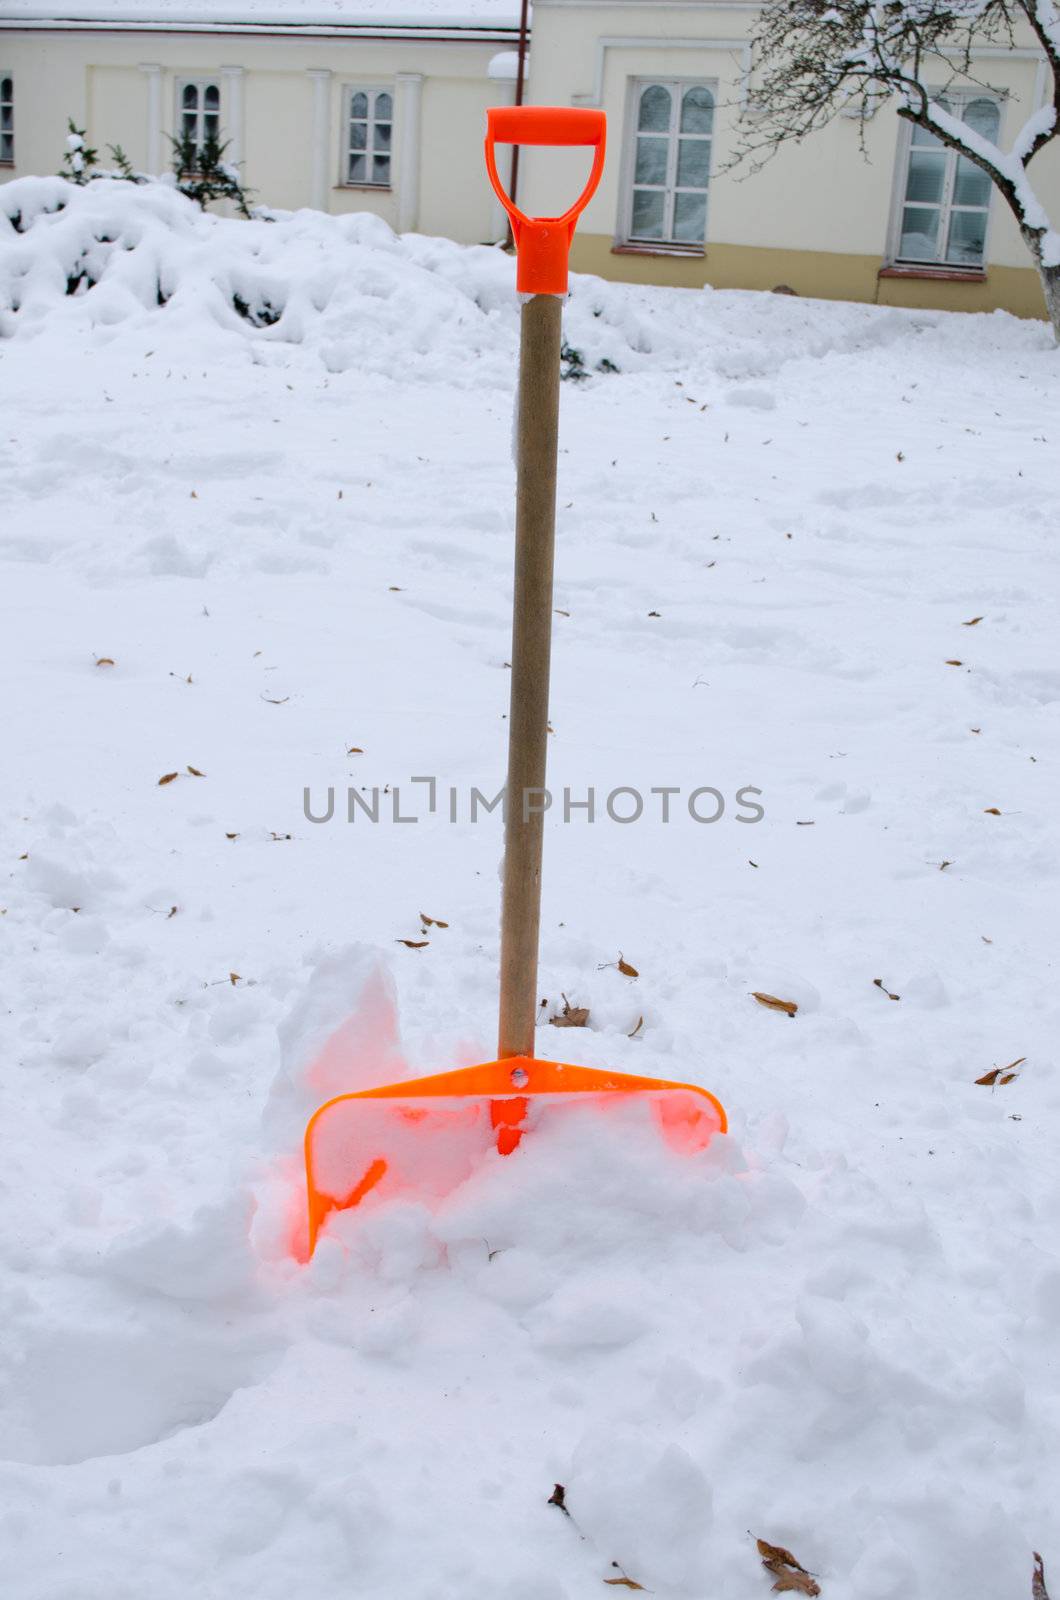 orange plastic snow clean tool in winter snowdrift snow heap and house in background.